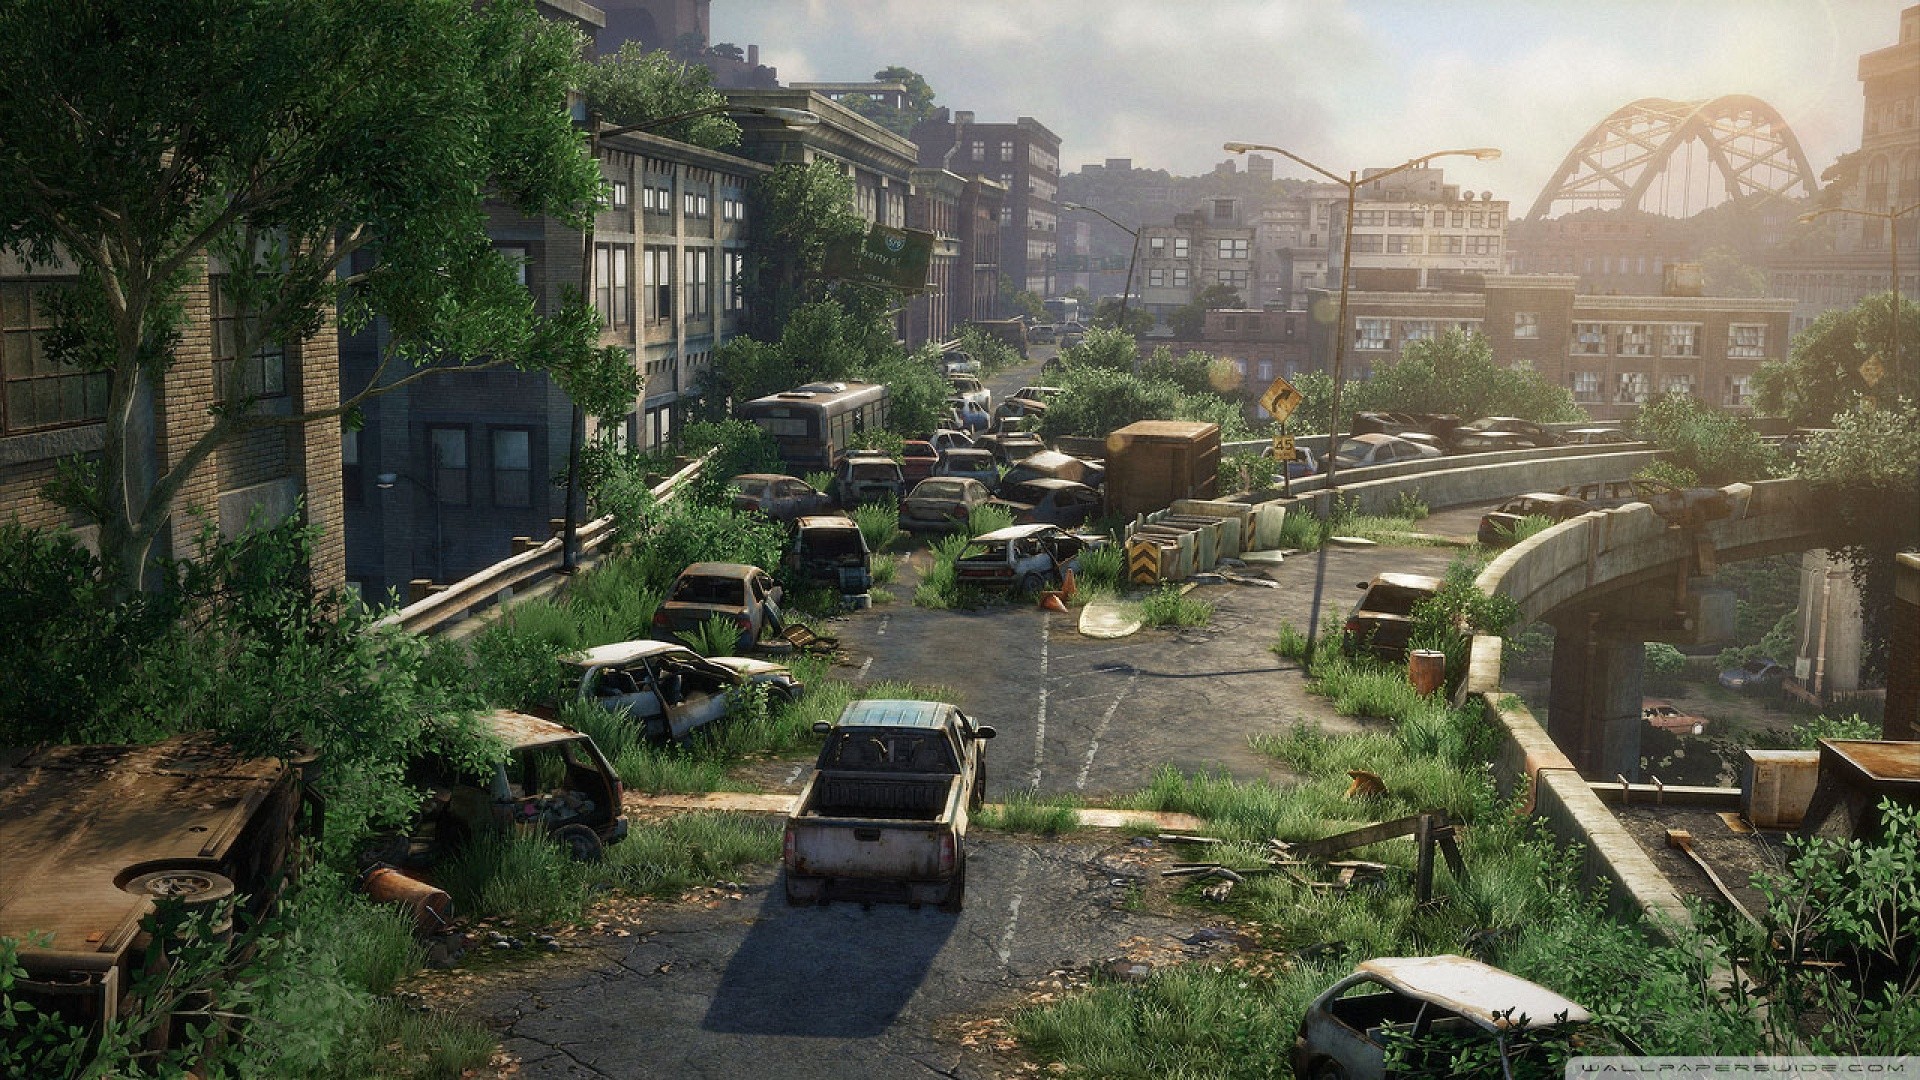 General 1920x1080 The Last of Us apocalyptic wreck ruins video games video game art vehicle cityscape